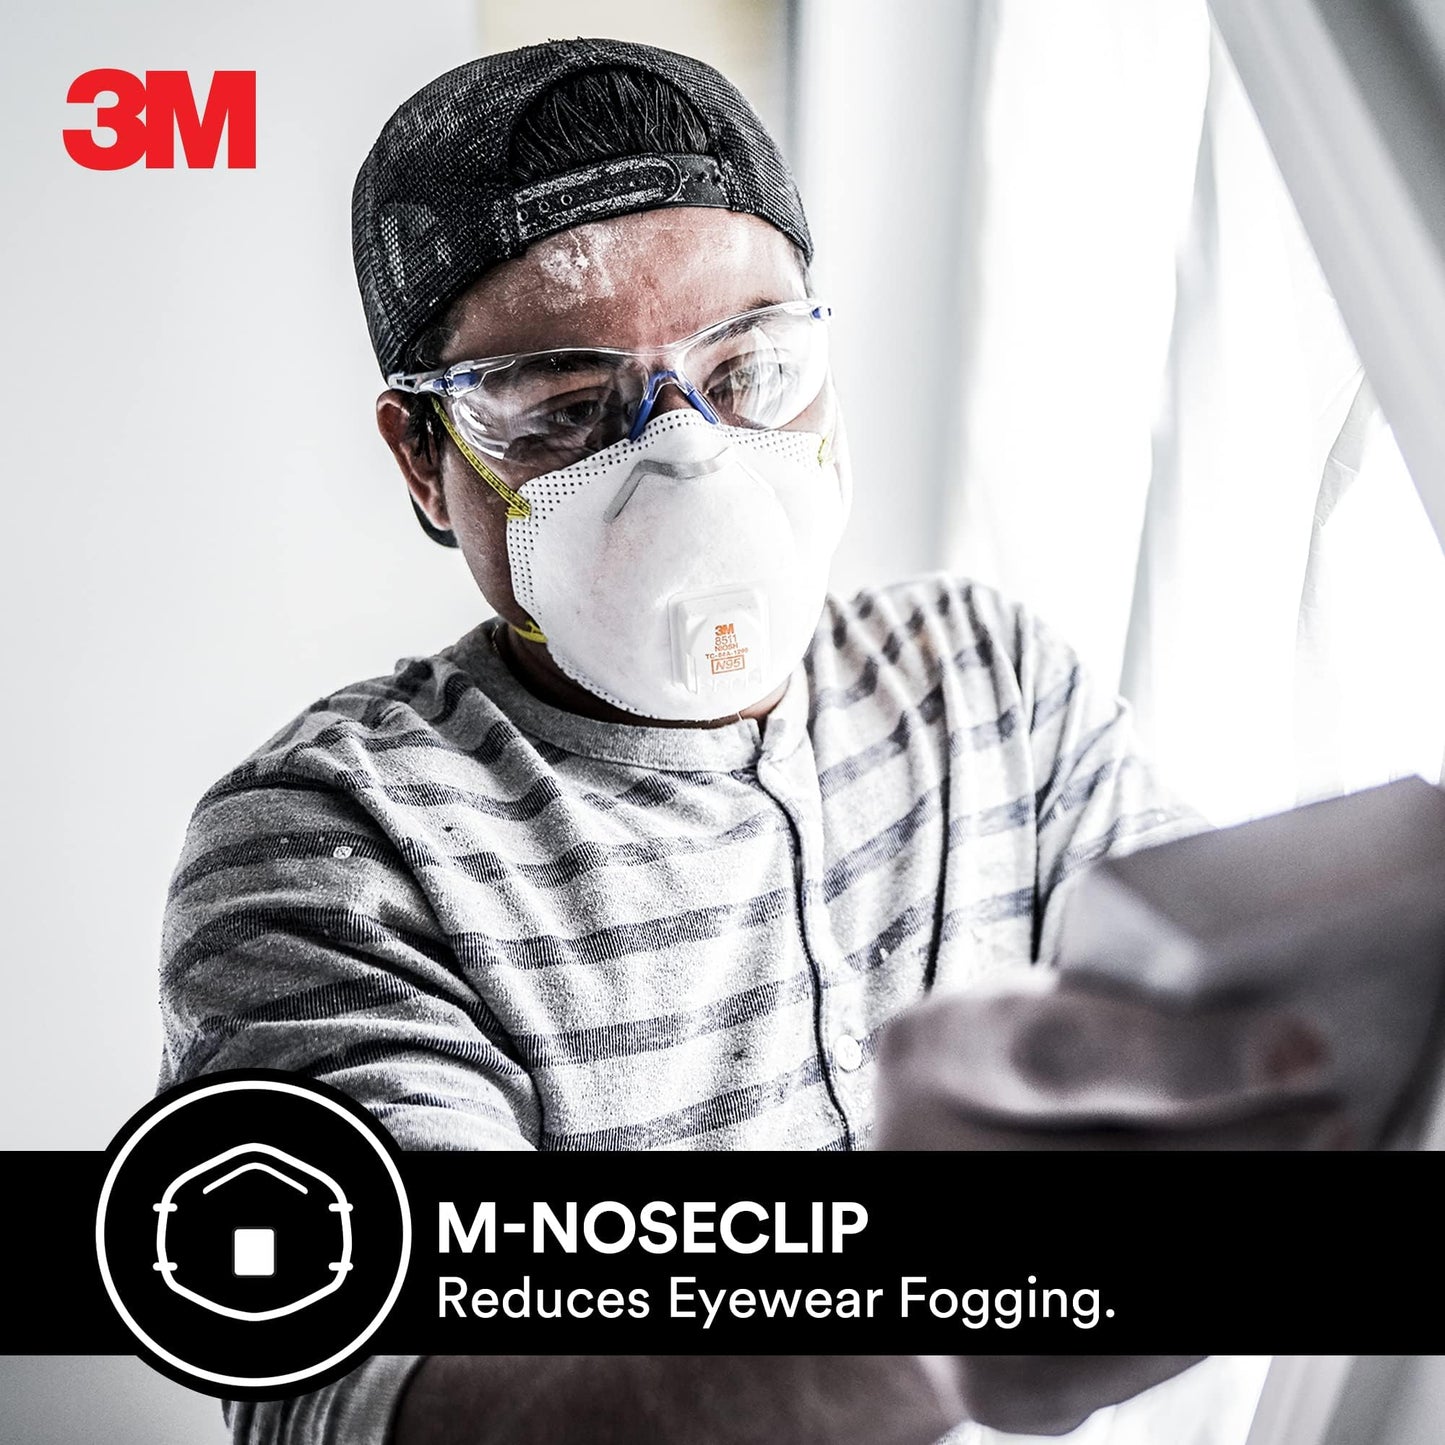 3M All-In-One Respirator, Best for Sanding, Fiberglass, Drywall, Painting, N95, Exhalation Valve Helps Direct Exhaled Air Downward, Relief From Dusts